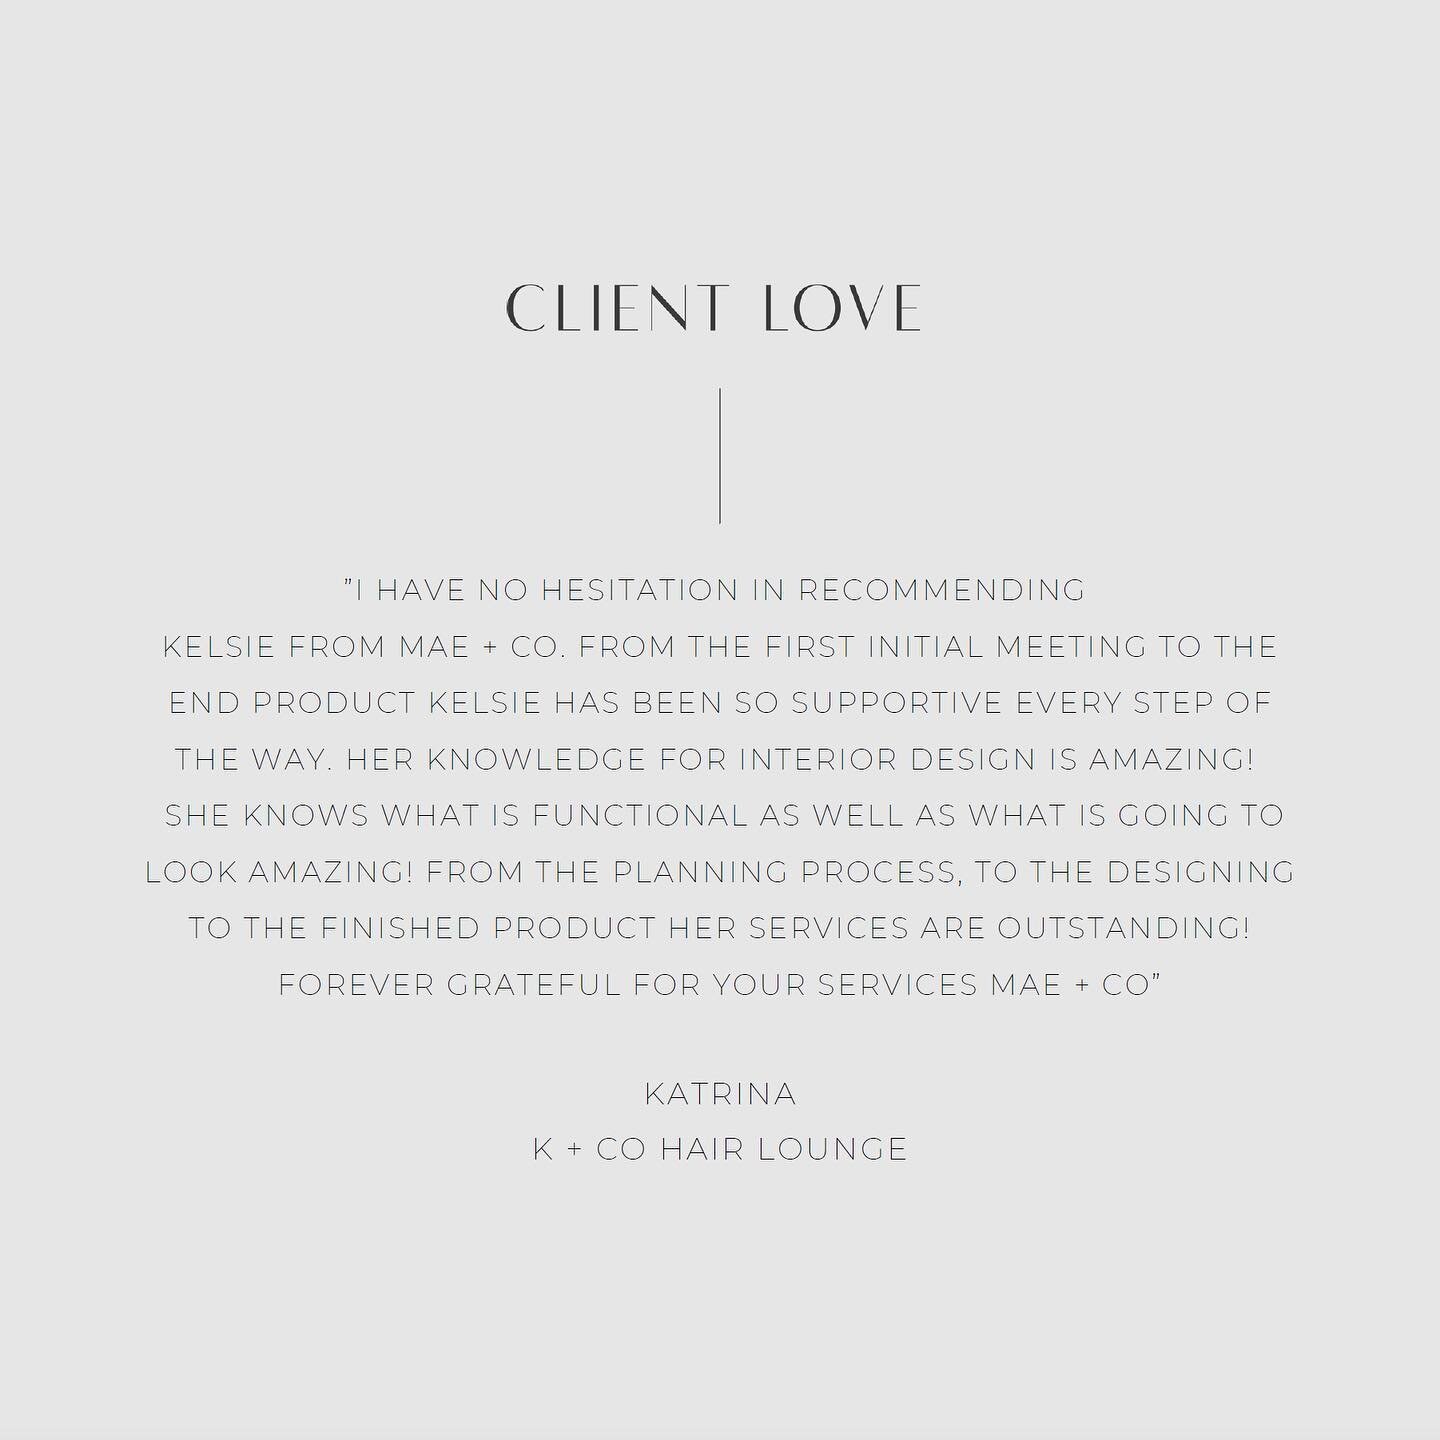 Starting off 2021 with these lovely words from Katrina at @kandcohairlounge 
It was a dream to work on this project from the Interiors to the branding + web design. We can&rsquo;t wait to share more of the finished product! ✨